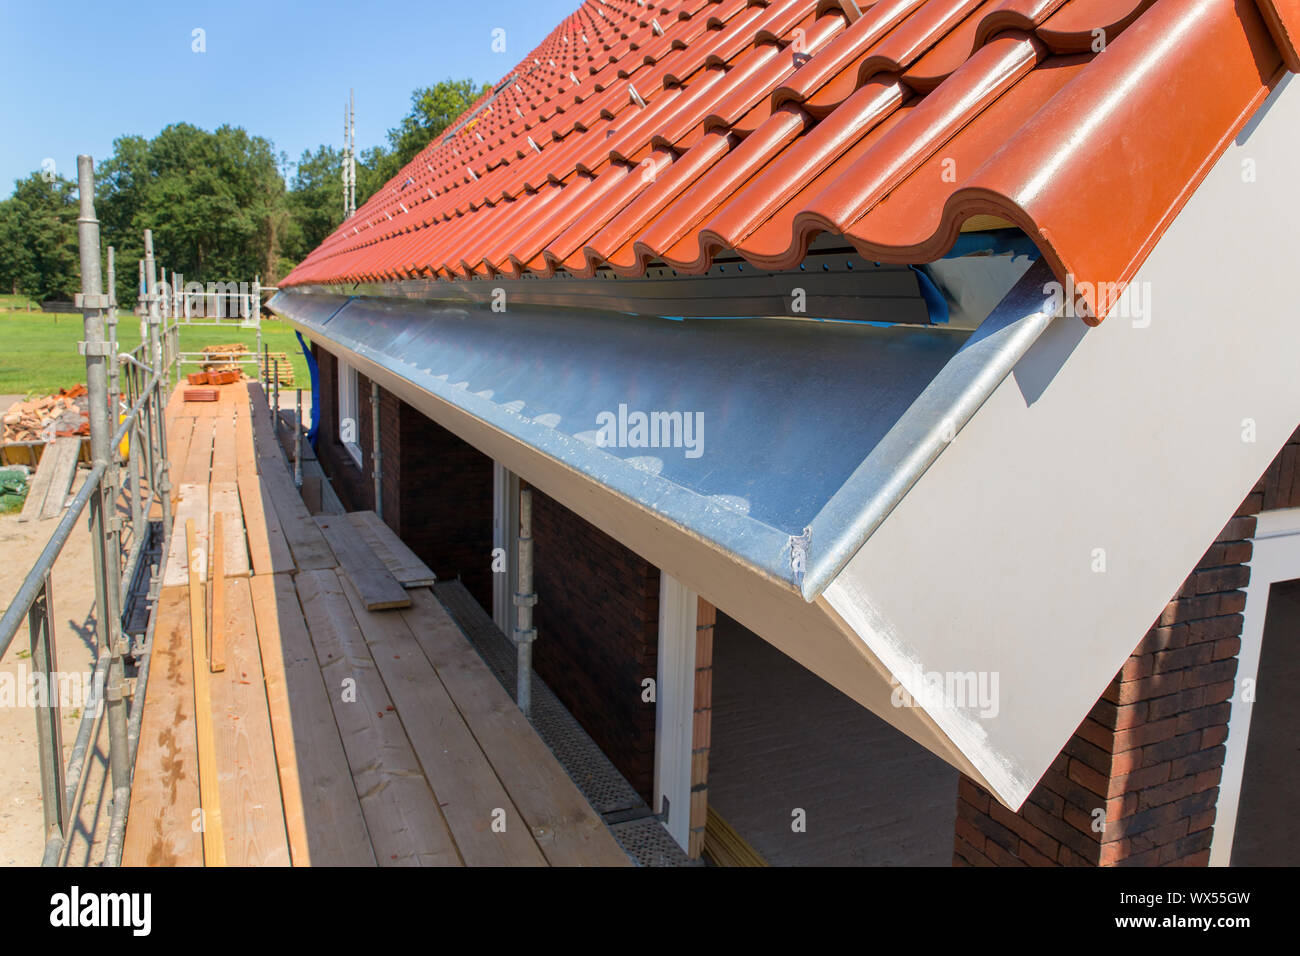 Zinc rain gutter with roof tiles and scaffolding Stock Photo